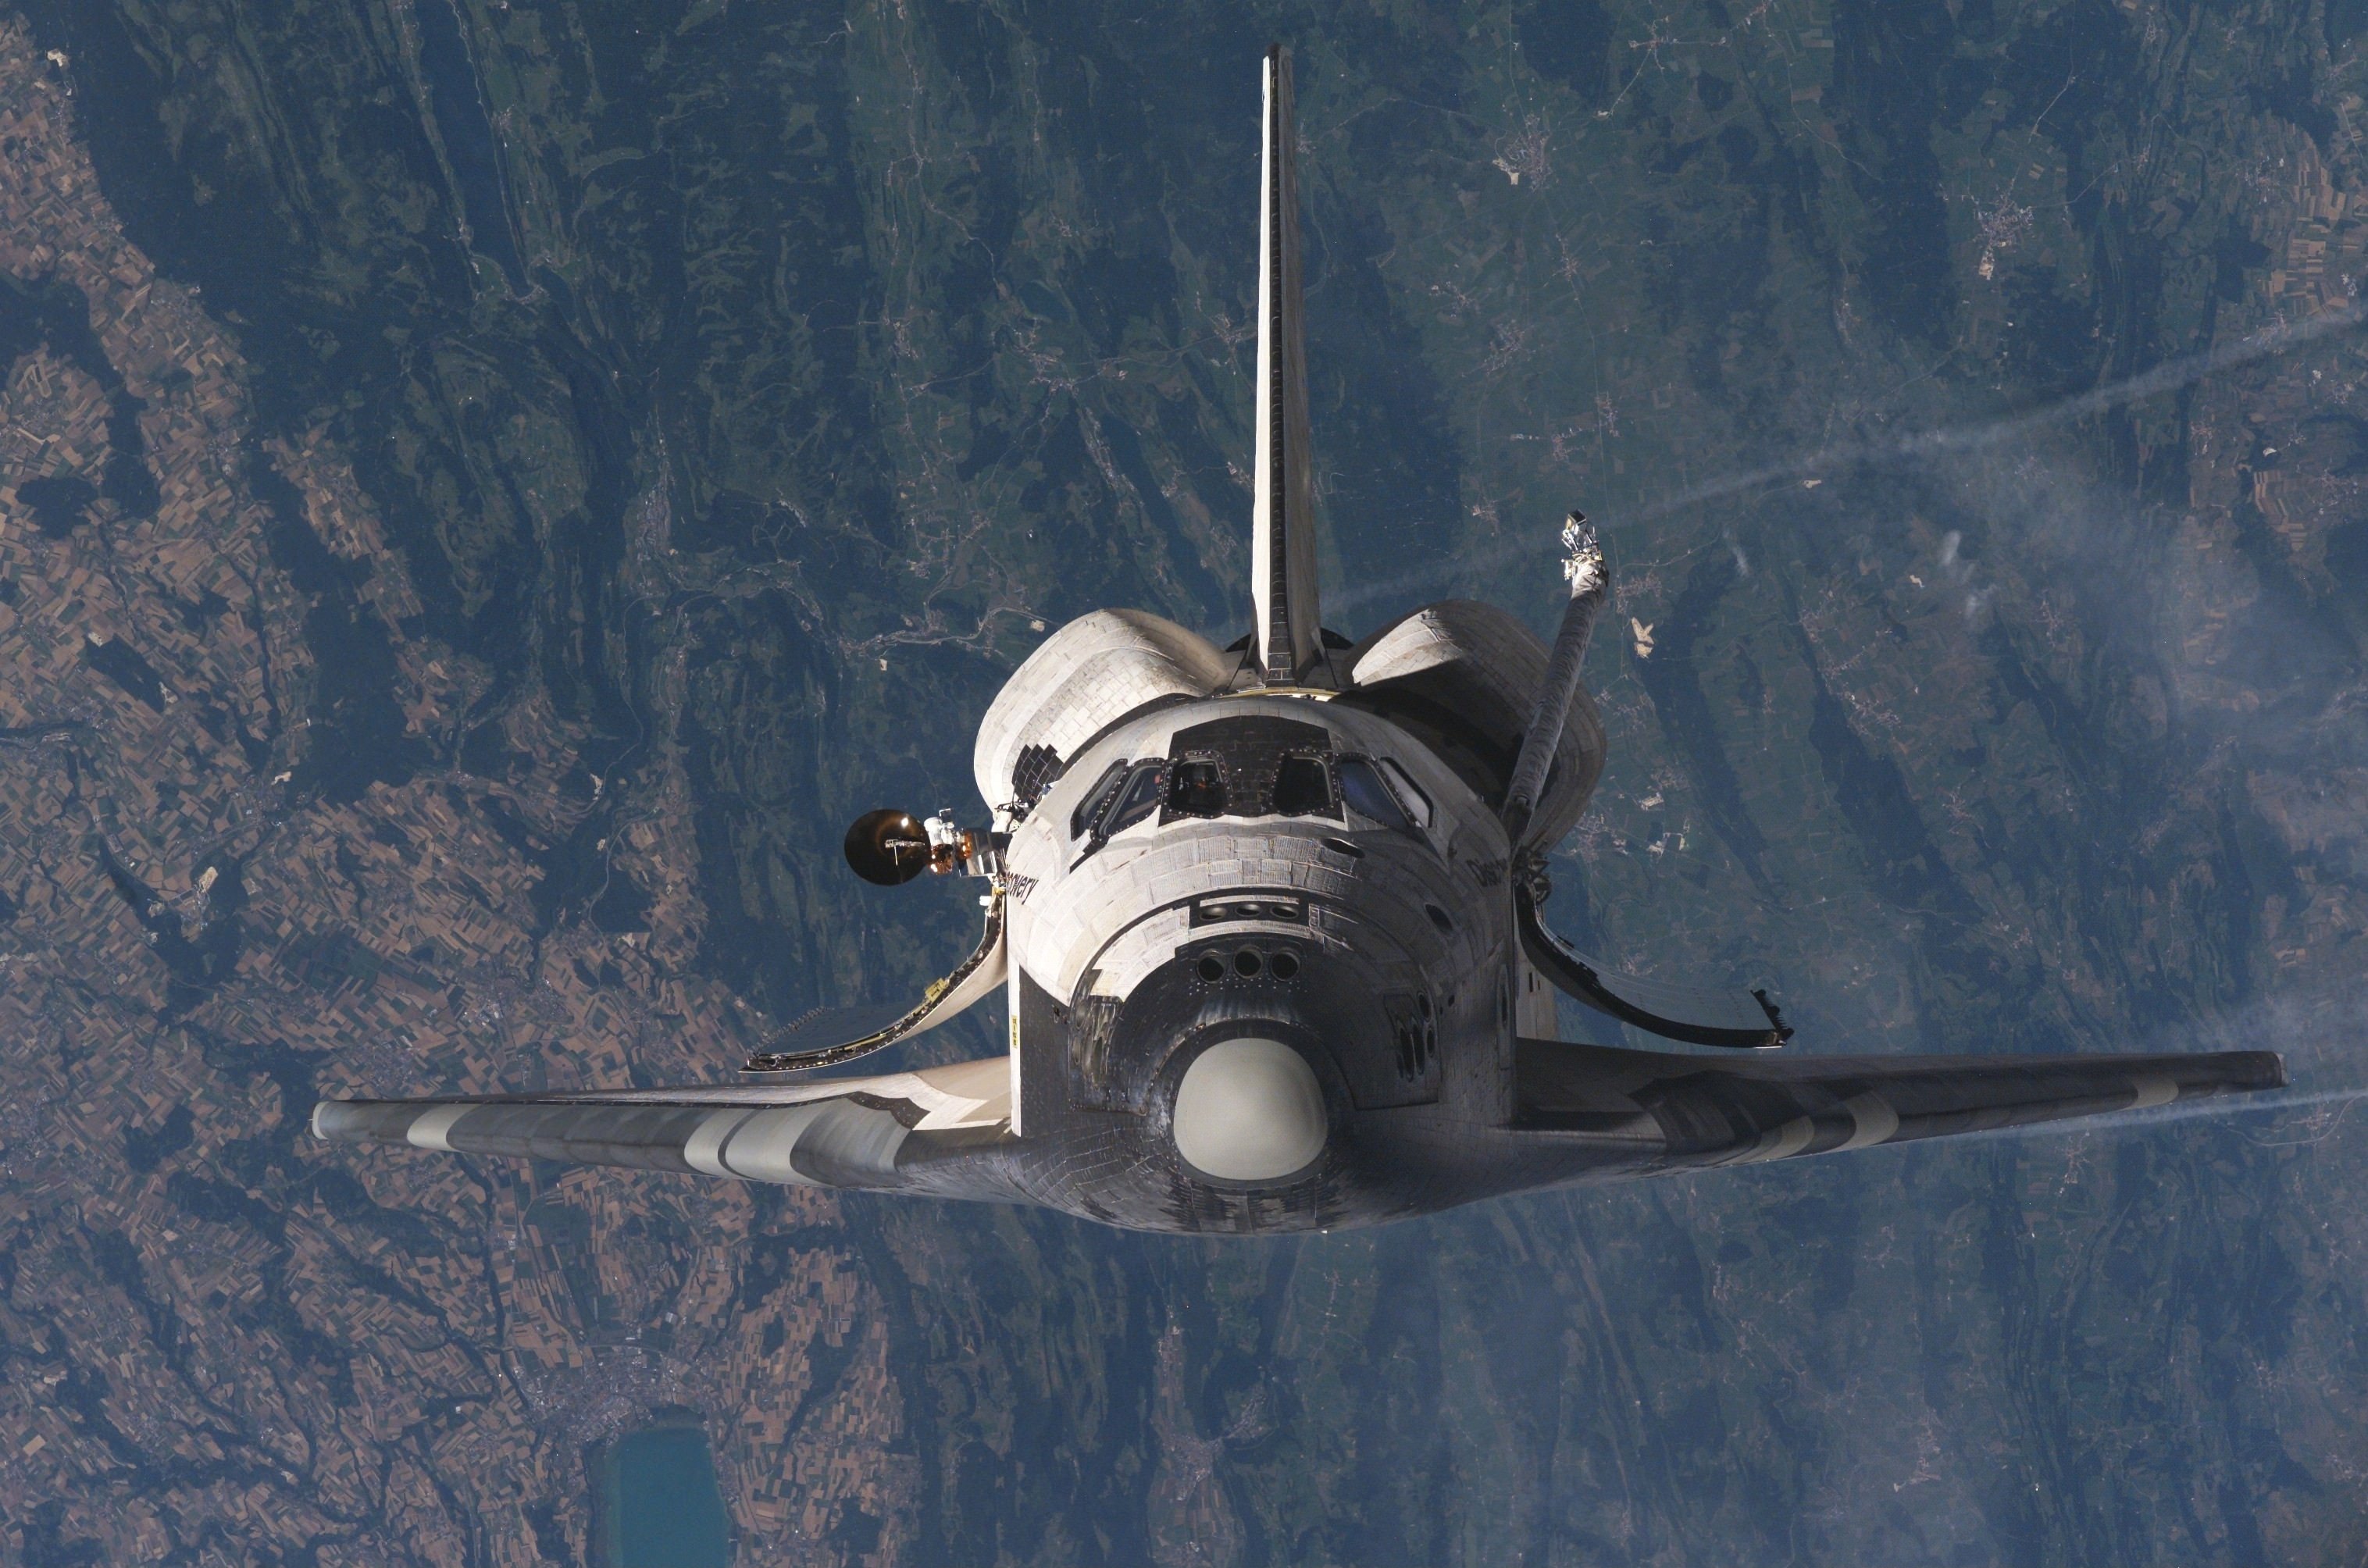 Space Shuttle Mars Mission - iPhone Wallpapers in 2023 | Space iphone  wallpaper, Astronaut wallpaper, Space shuttle